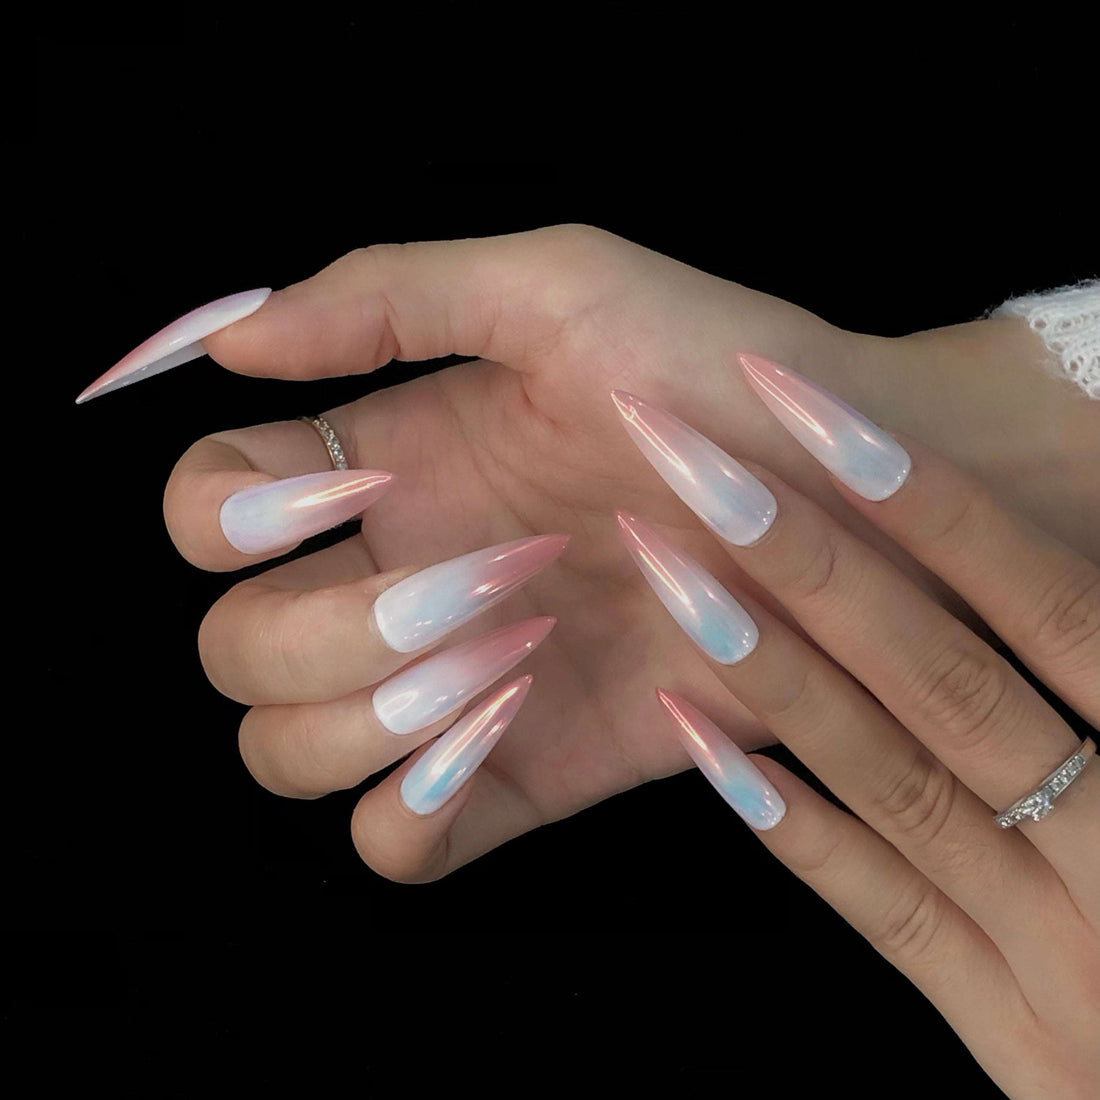 Handmade Ombre Chrome Press On Nails - White & Pink Gradient Design.